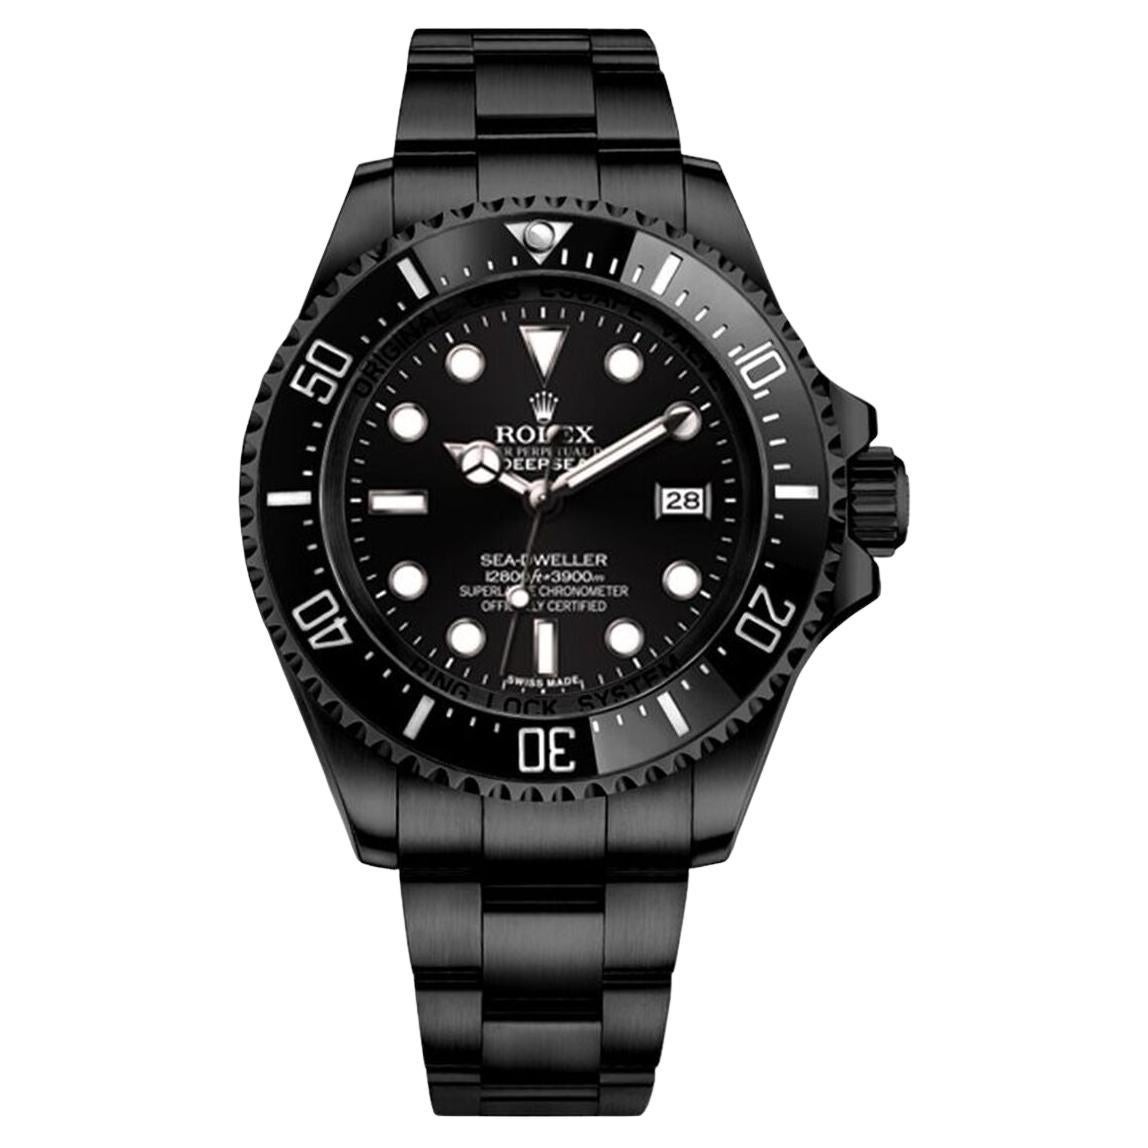 Rolex Deepsea Sea Dweller 44mm Steel Black Dial Automatic Mens Watch 116660 For Sale At 1stdibs